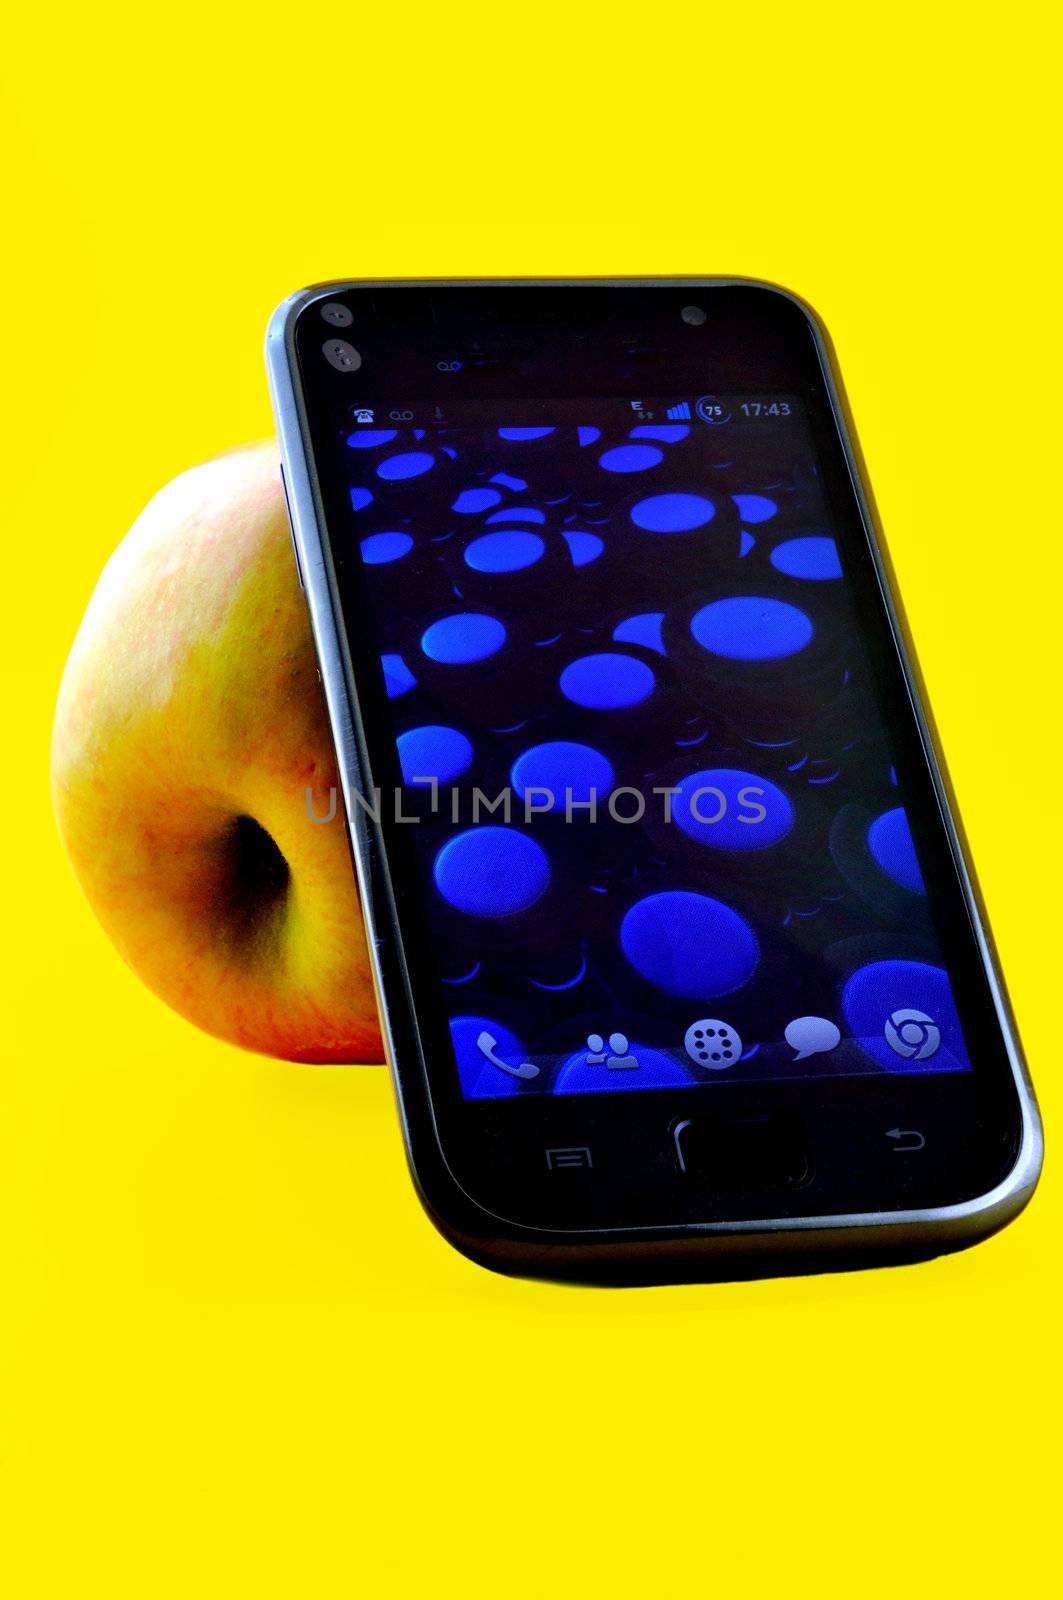 Mobile phone and apple, on which he relies, photographed against a yellow background